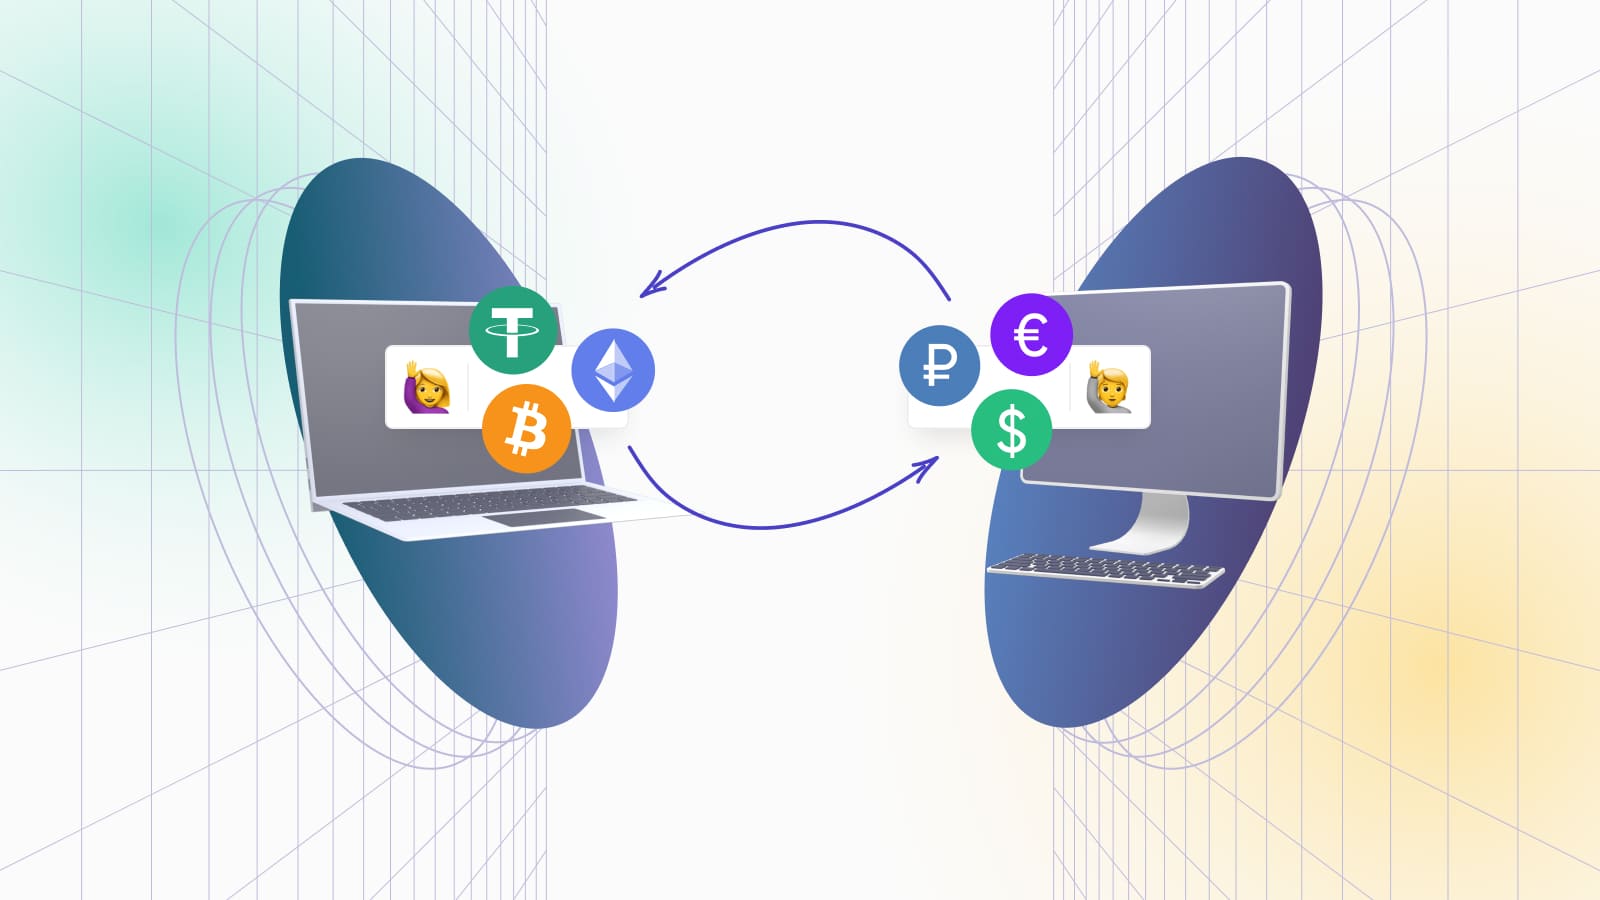 P2P exchanges enable direct, commission-free crypto transactions between users.